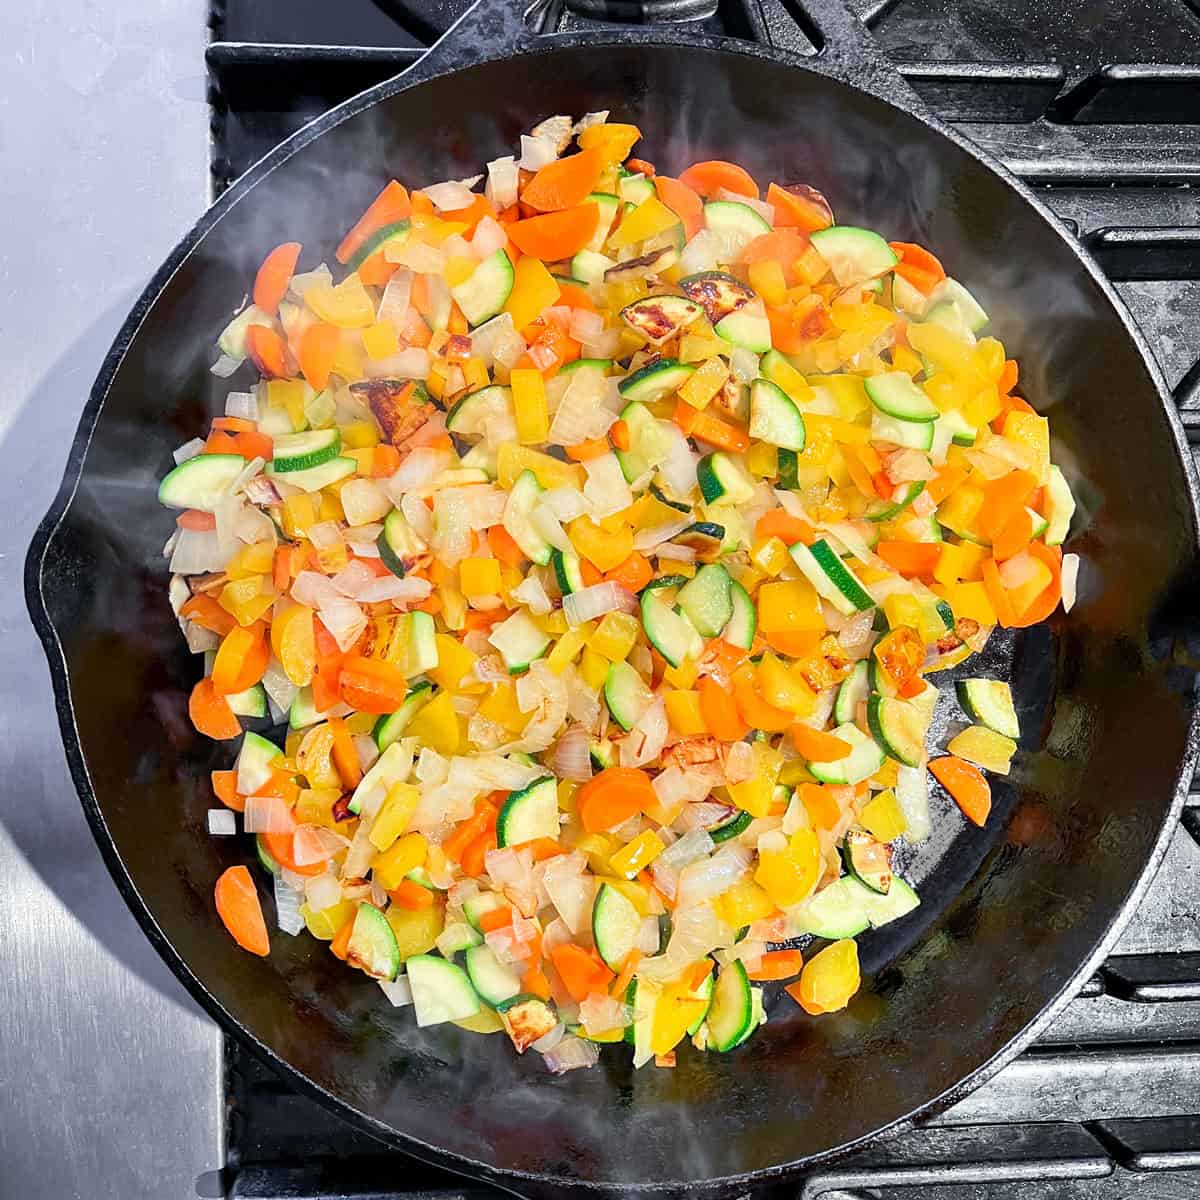 chopped carrots, onions, zucchini and yellow peppers cooking in a cast iron skillet.